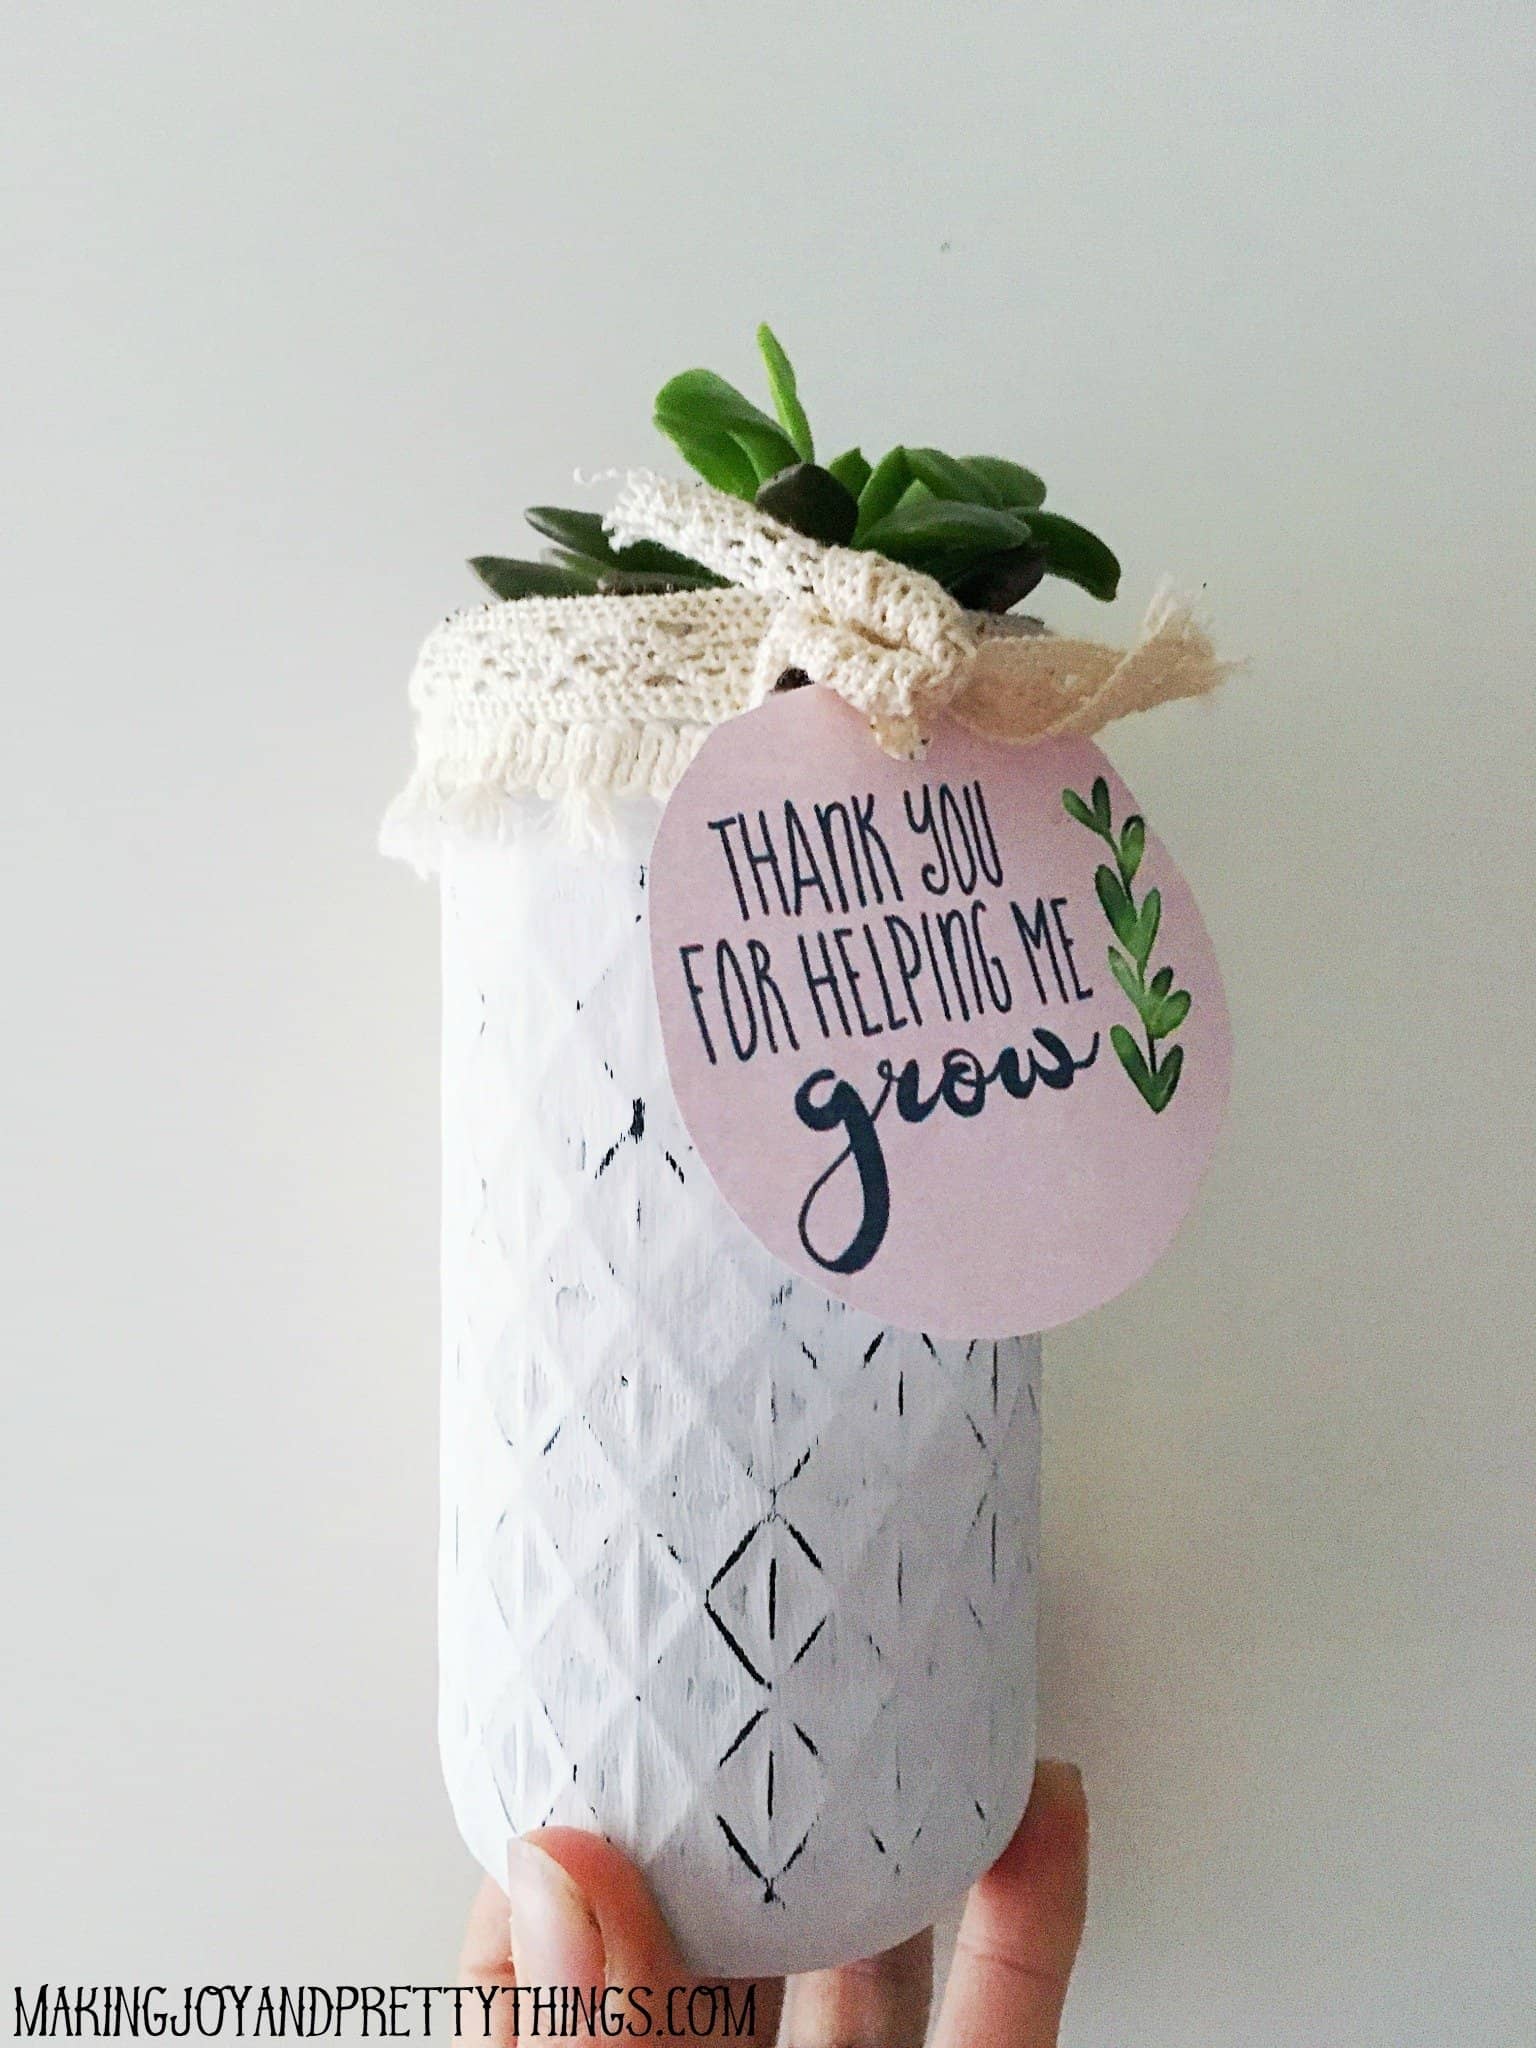 DIY mason jar distressed with white paint and sanded makes a great teacher gift at the end of the school year